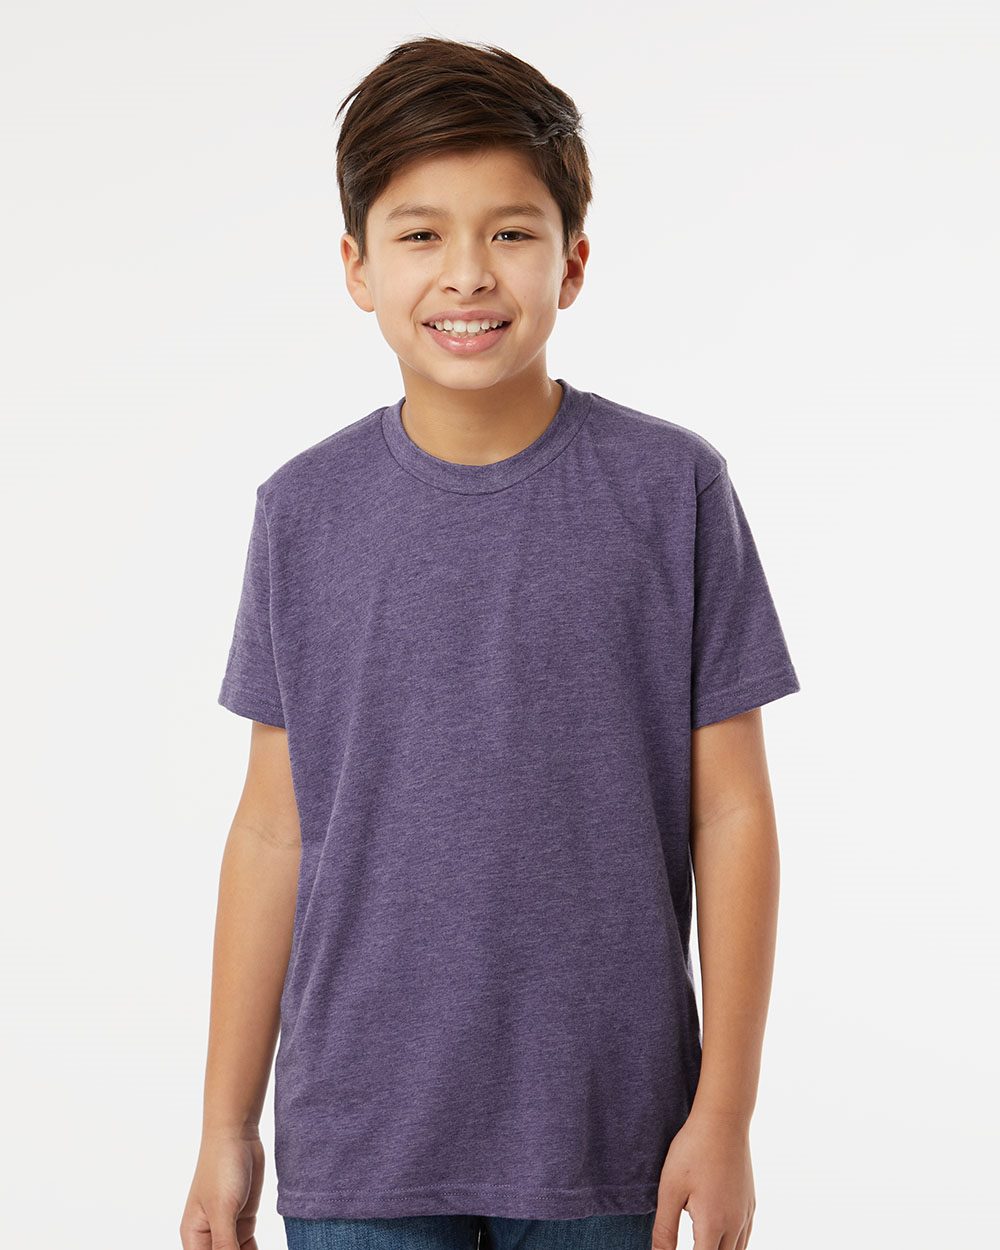 M&O Youth Deluxe Blend T-Shirt 3544 M&amp;O Youth Deluxe Blend T-Shirt 3544